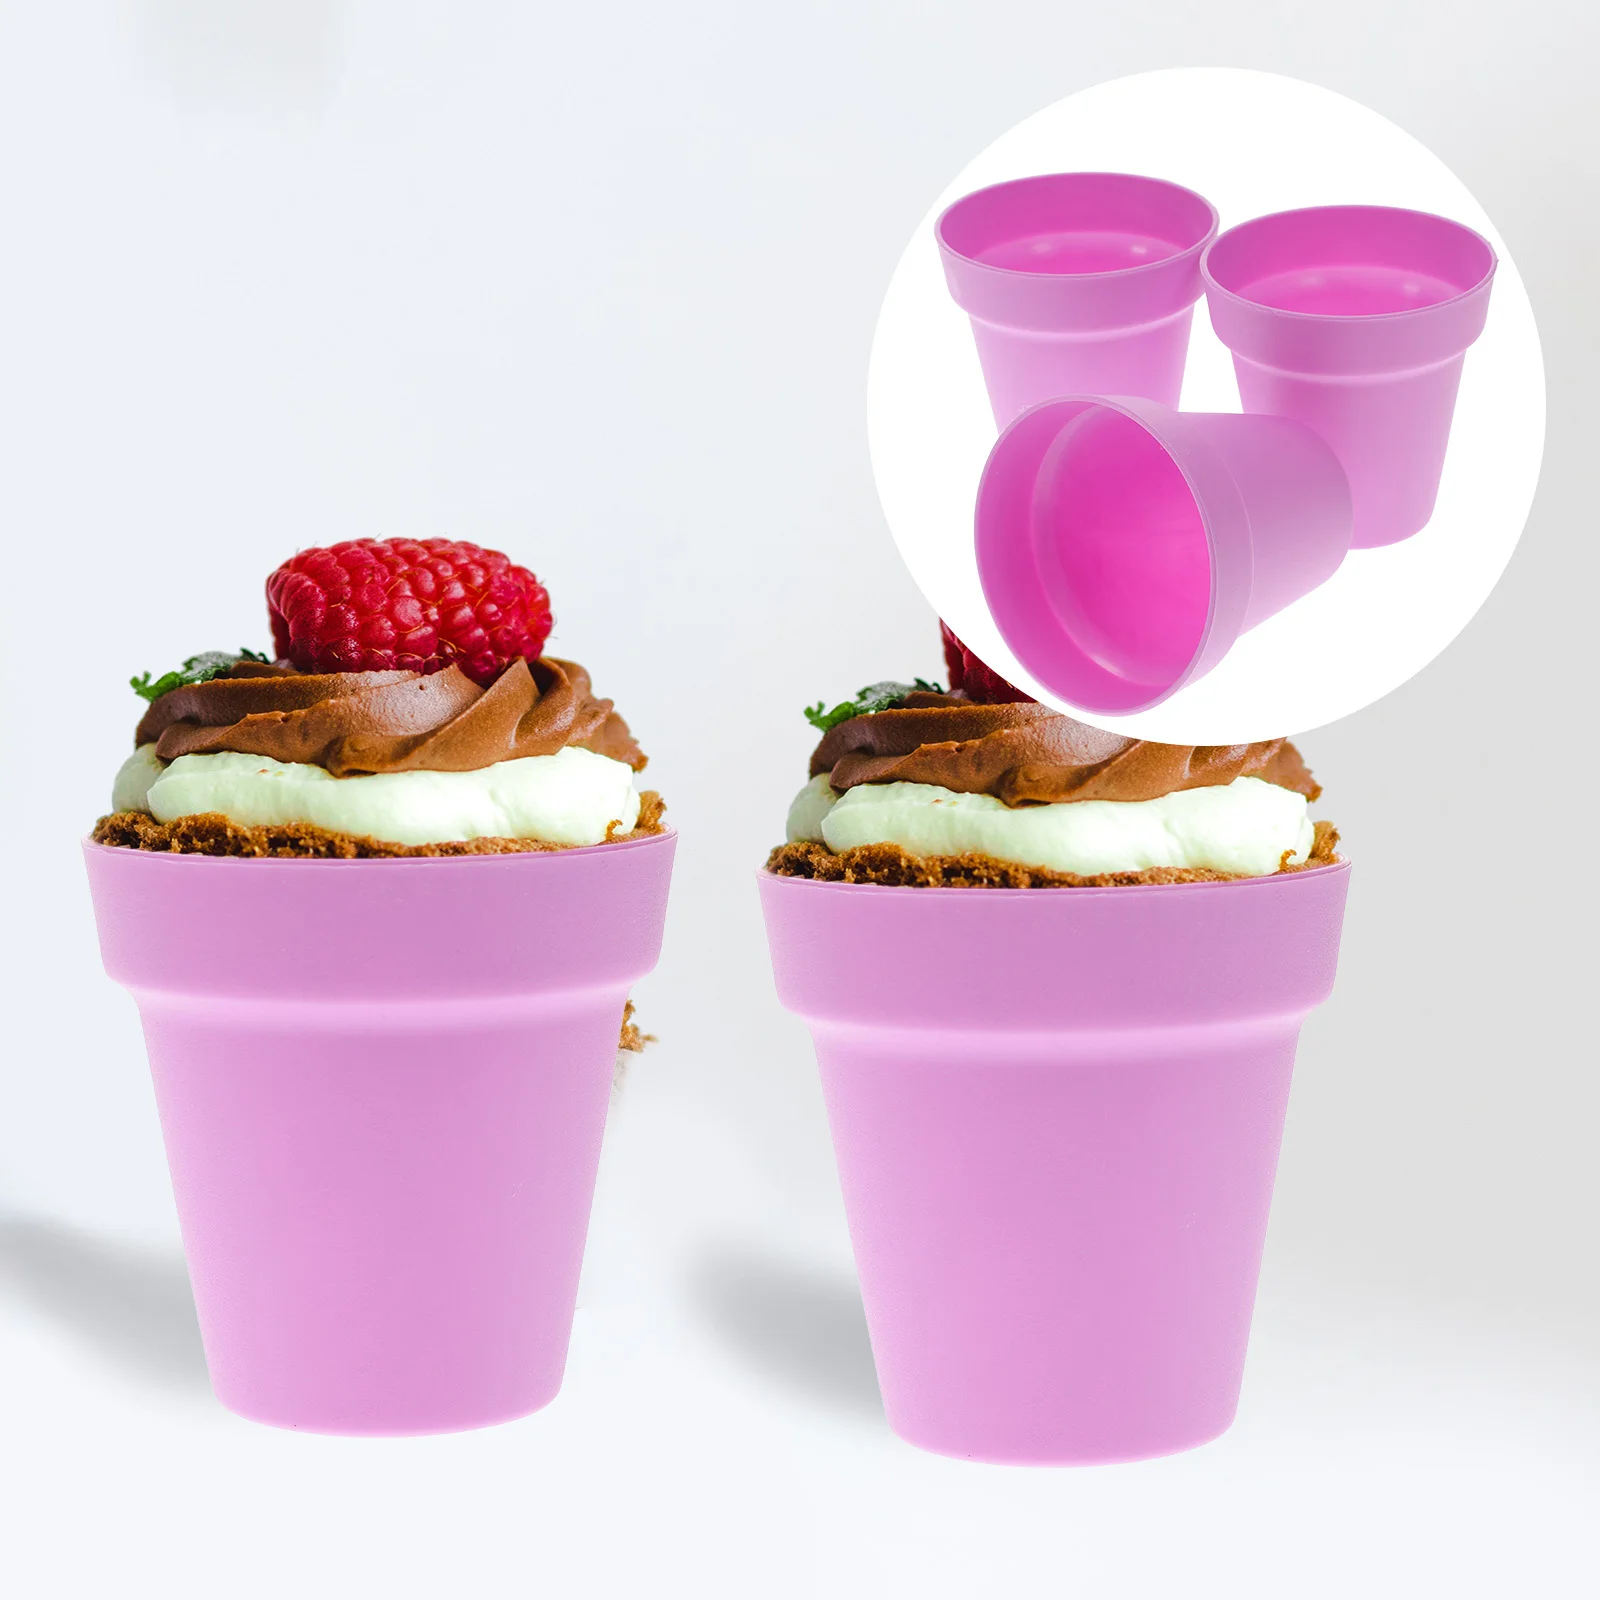 

Silicone Cups Cupcake Glasses Ice Cream Cup Sundae Liners Bowls Pots Flower Parfait Trifle Small Pot Dessert Bowl Planter Candy